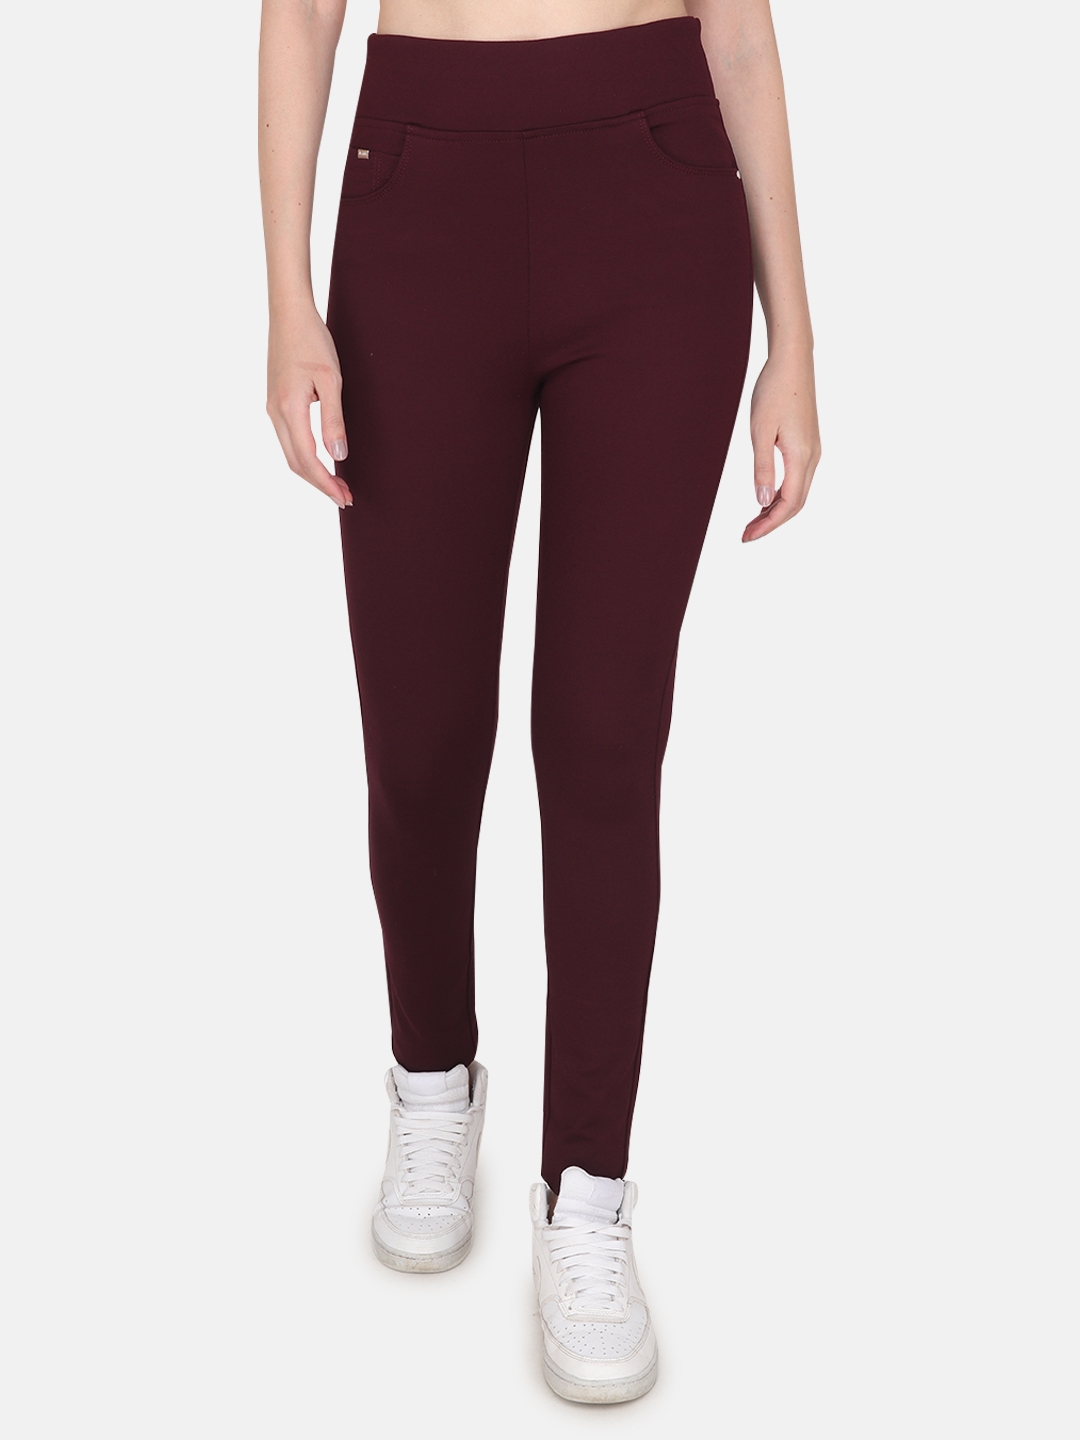 Albion By CnM Wine Women's Jegging